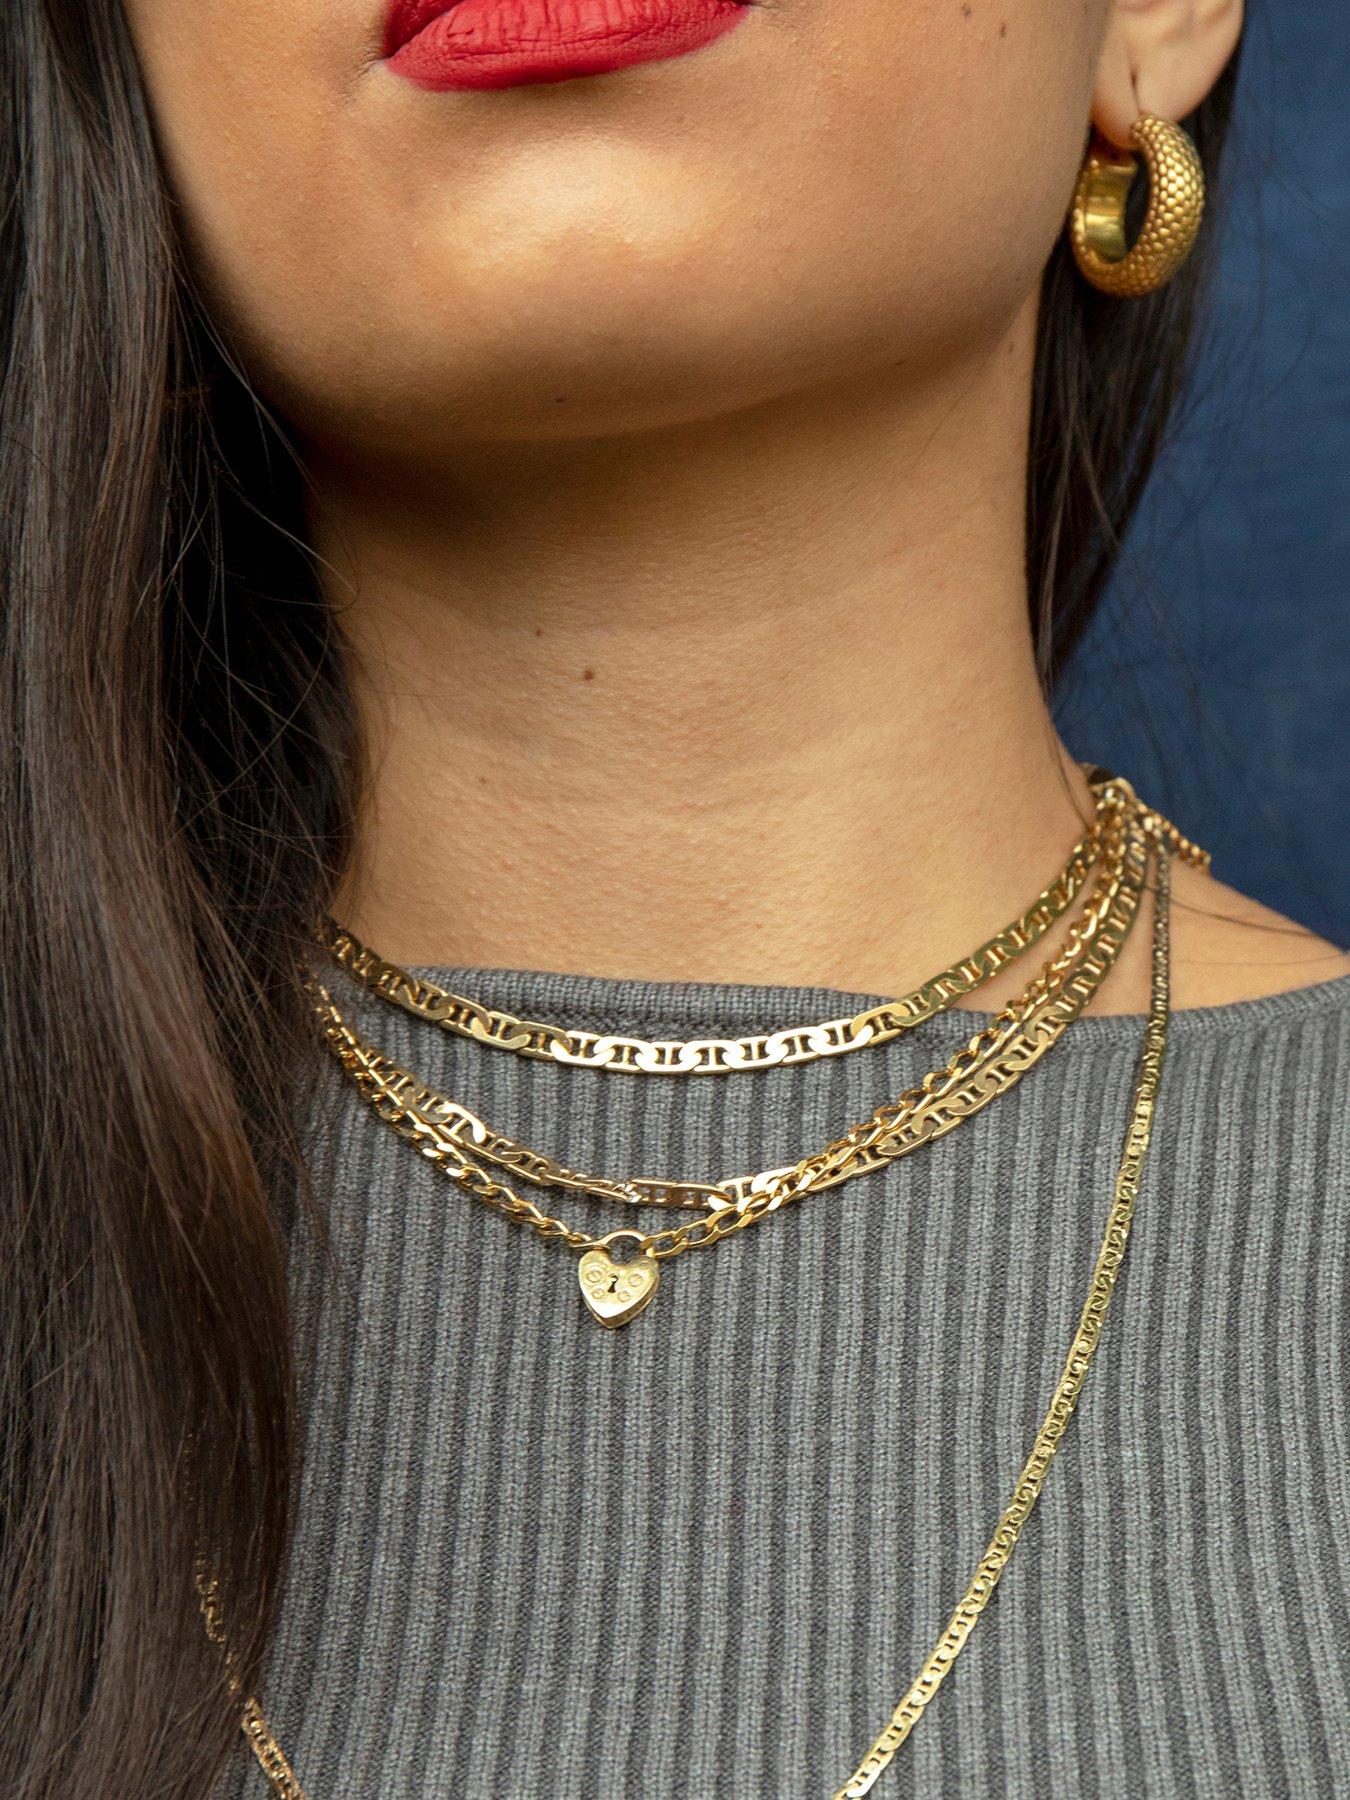 Seol + Gold sterling silver 20-22 length curb chain necklace